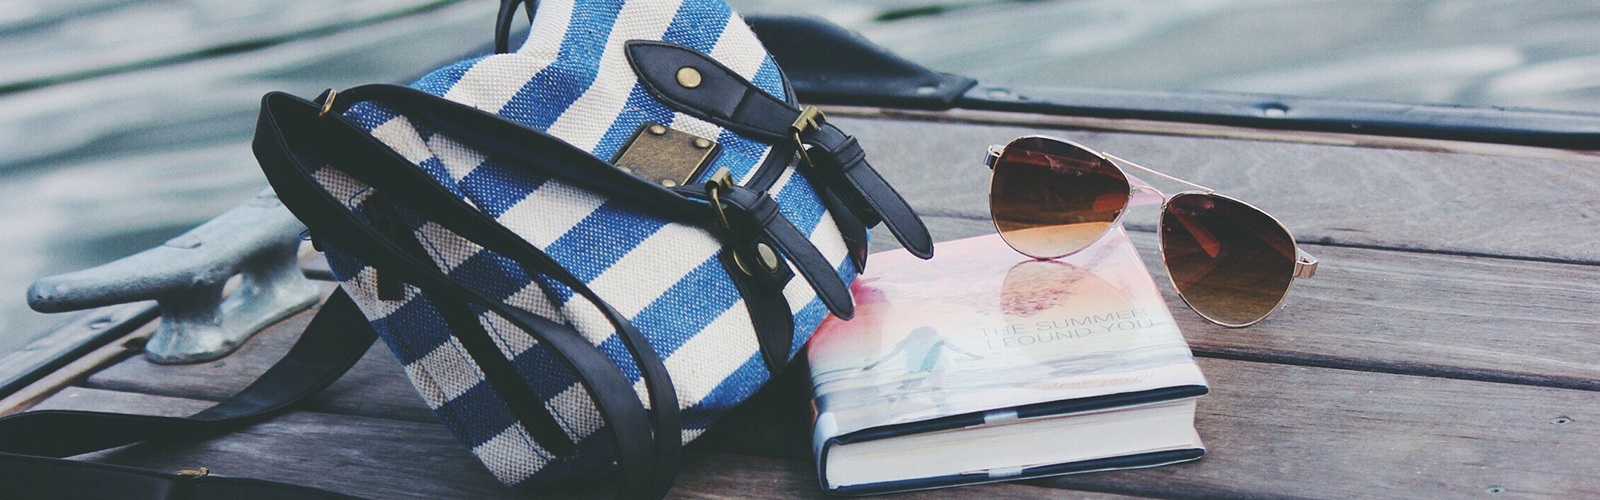 Traveler's guide: how to pack your sunglasses